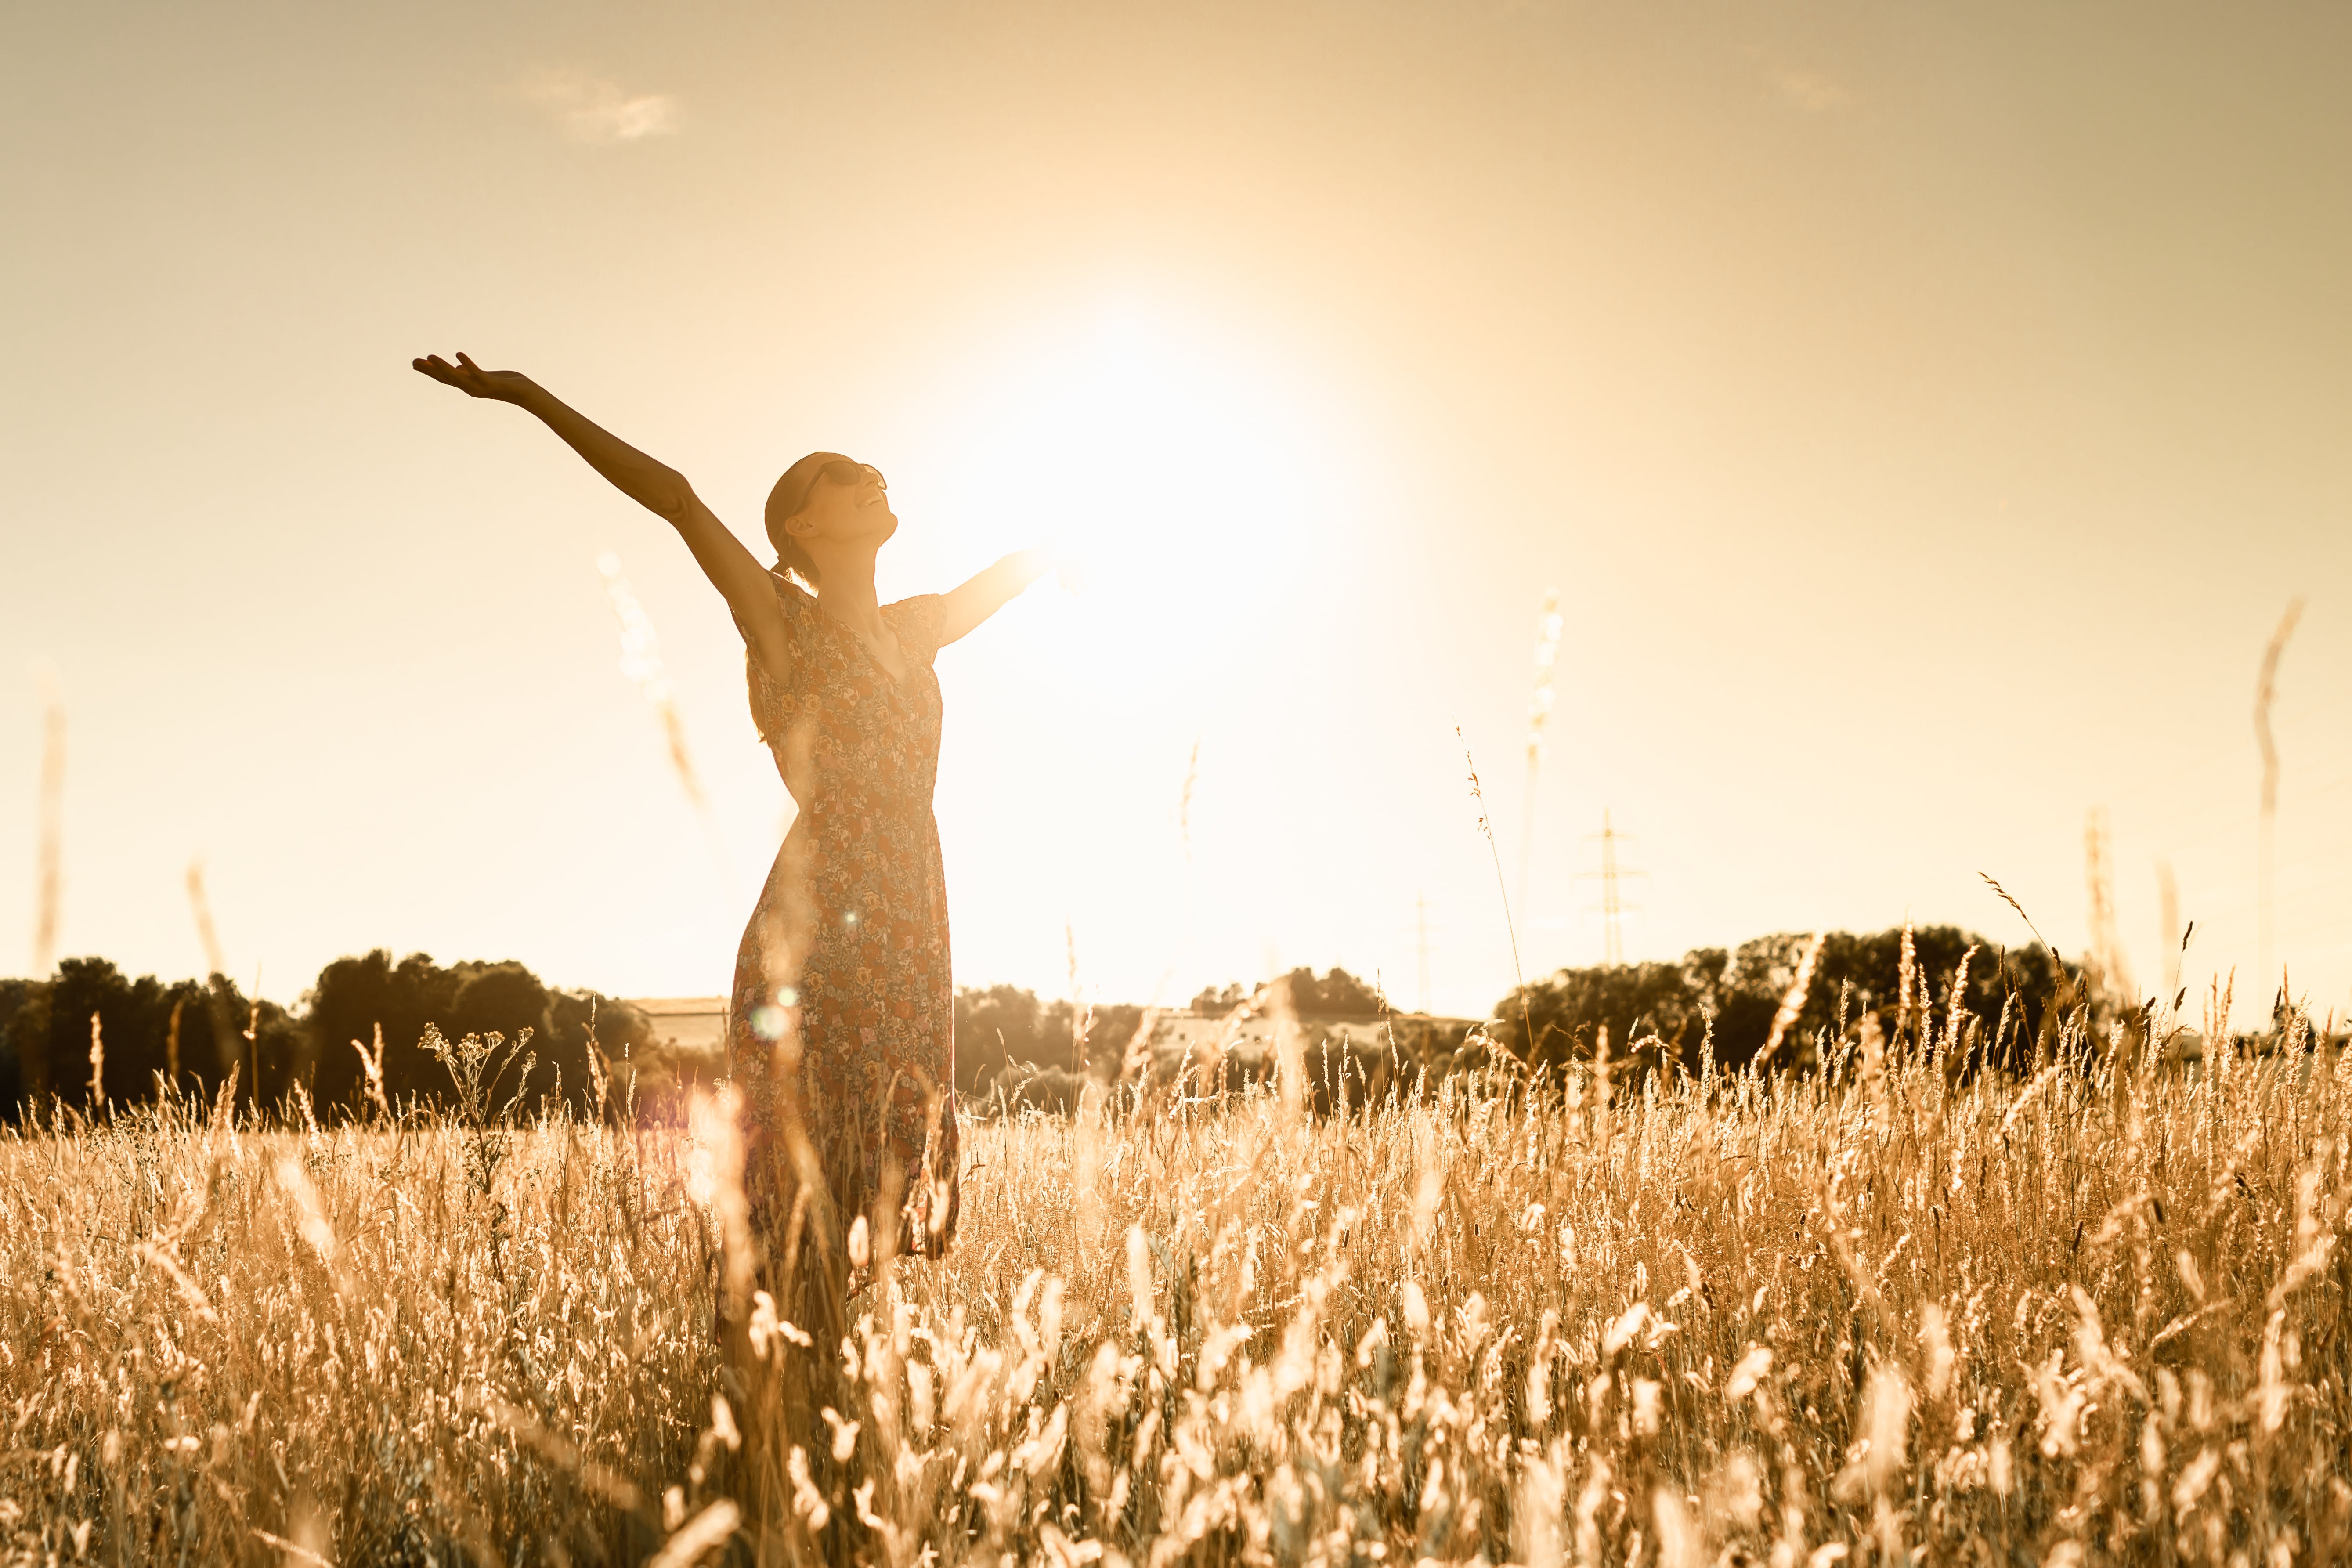 A woman standing in a field of wheat stretching her arms up high as the sun rises